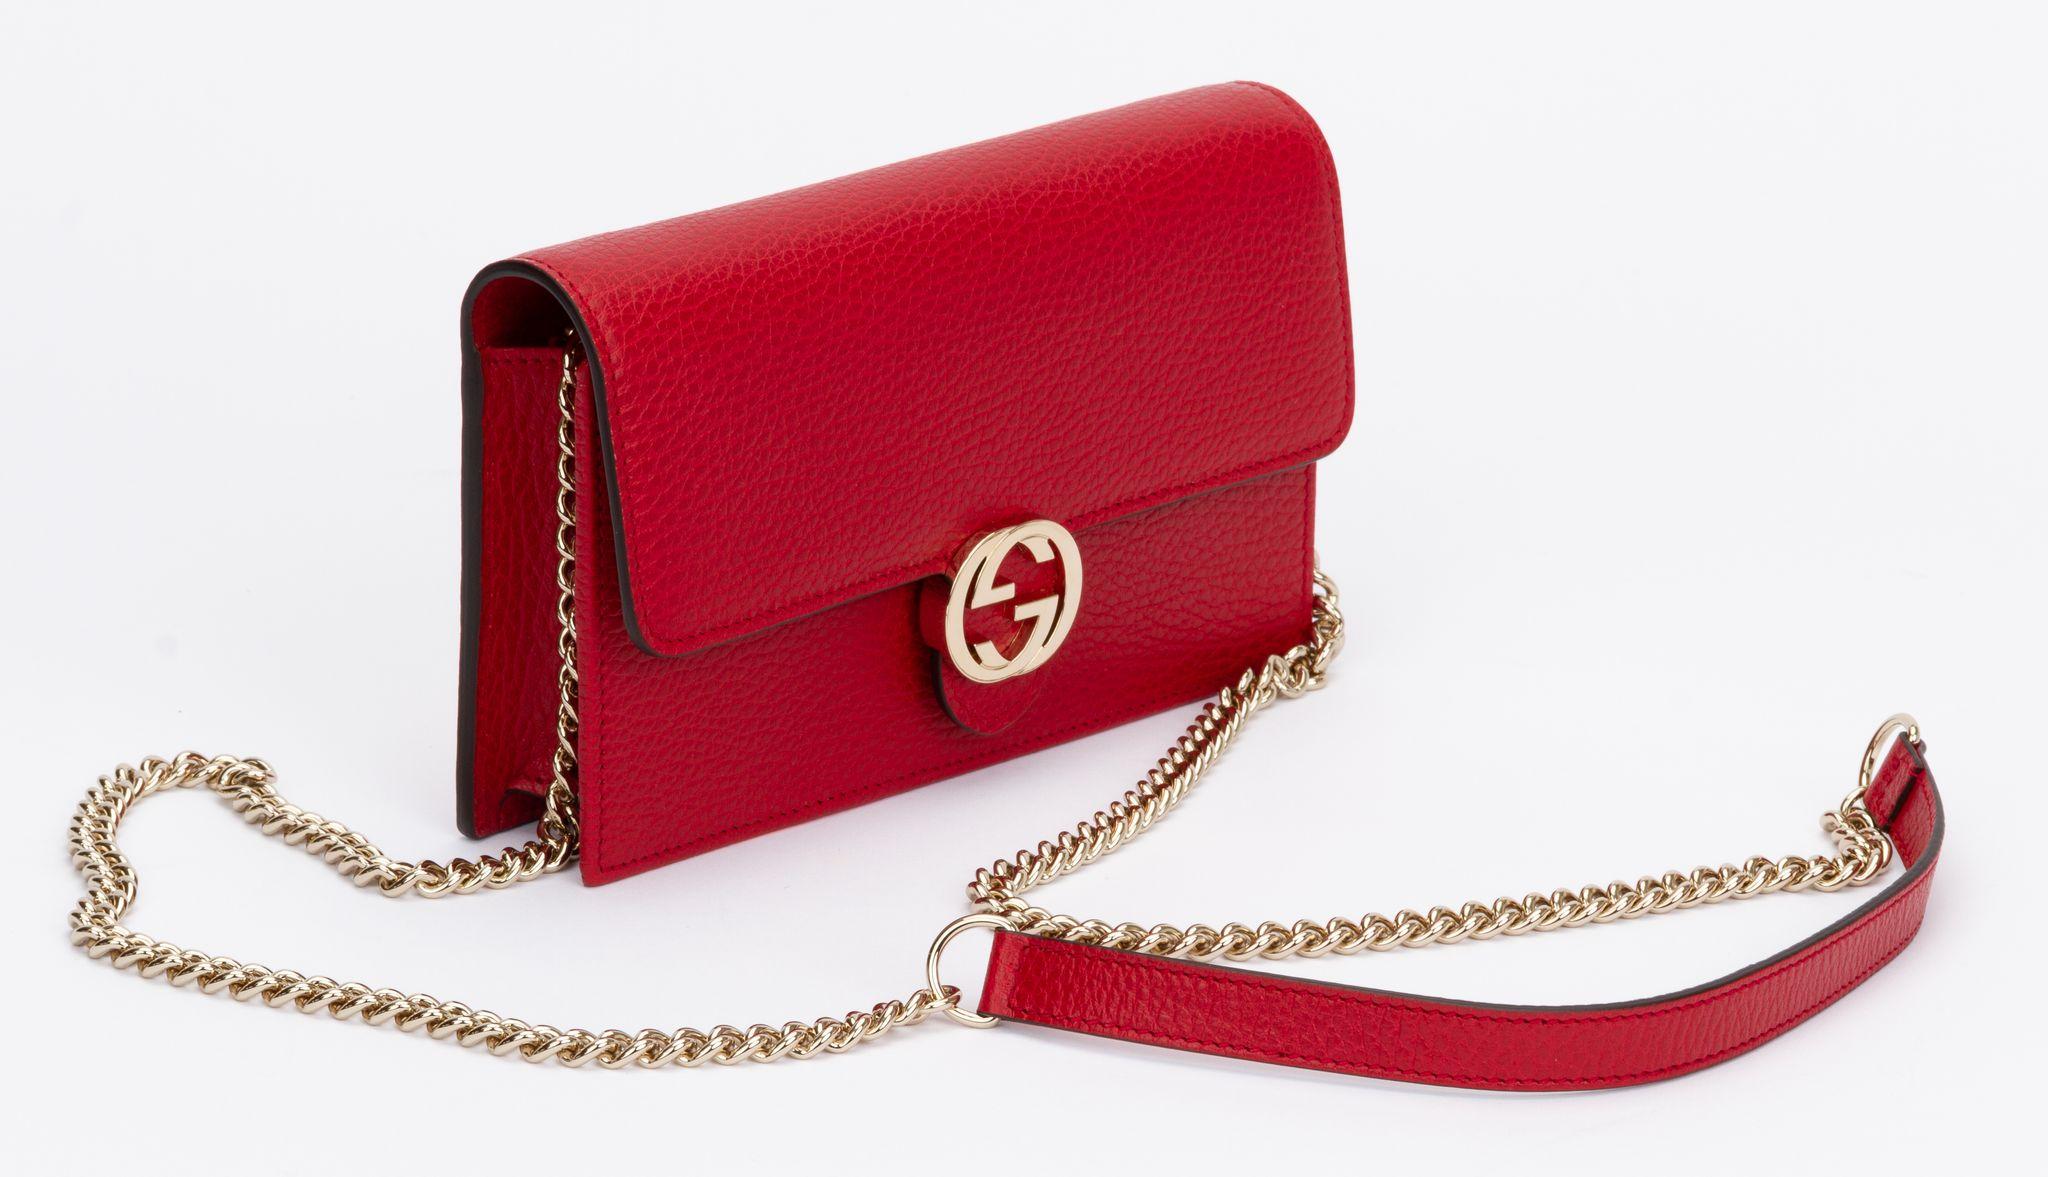 Gucci new in box red hammered leather cross body bag with light gold tone hardware. Shoulder strap drop 23.5